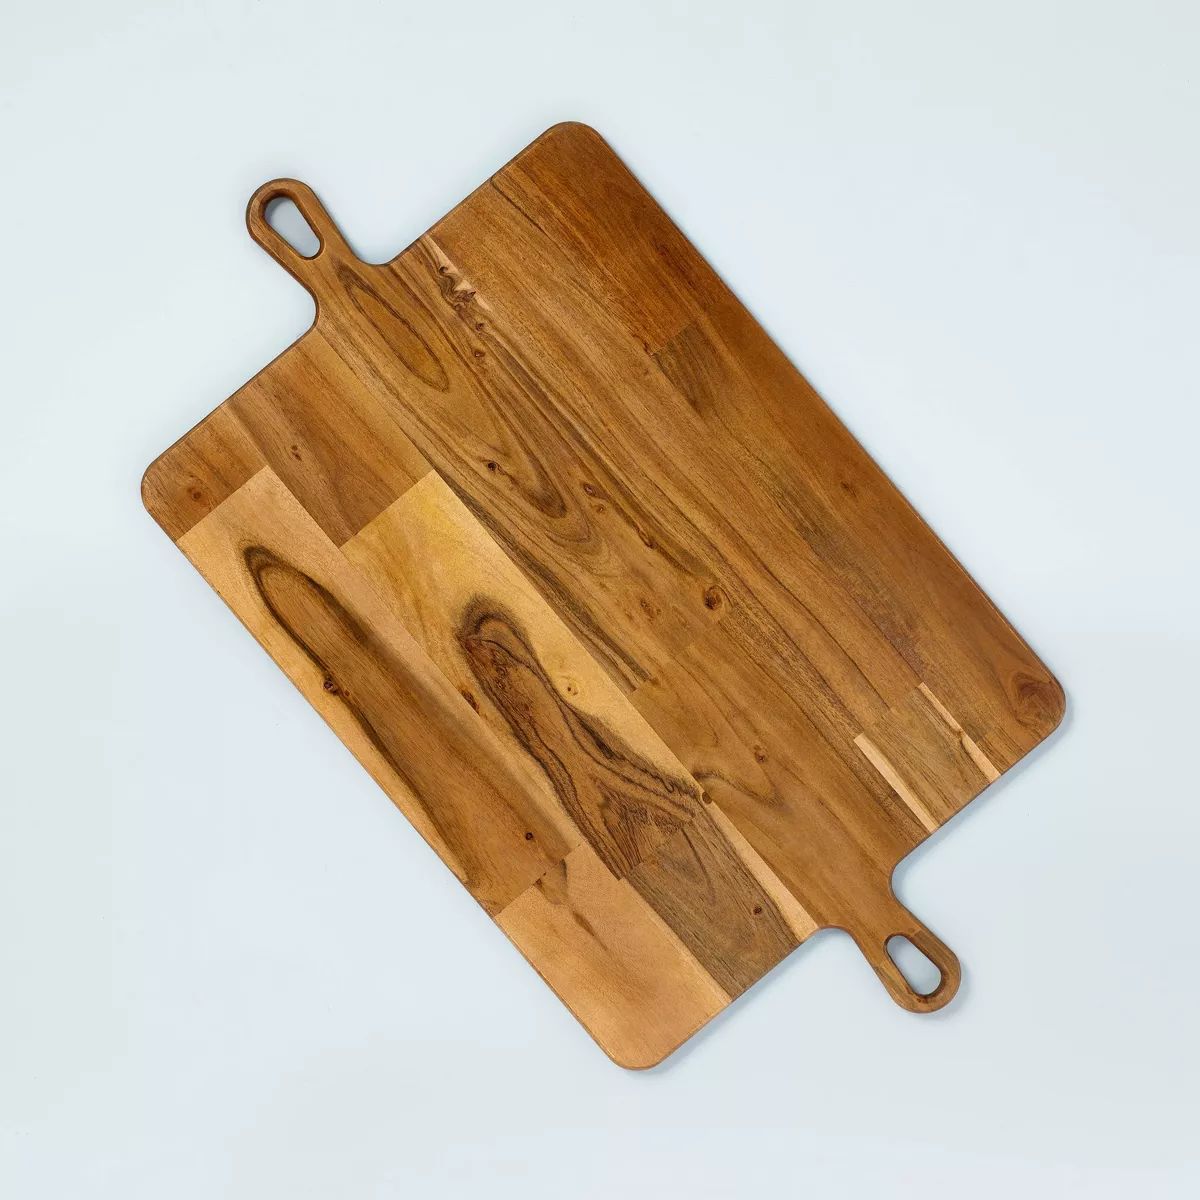 Large Double Handle Wood Serve Board - Hearth & Hand™ with Magnolia | Target